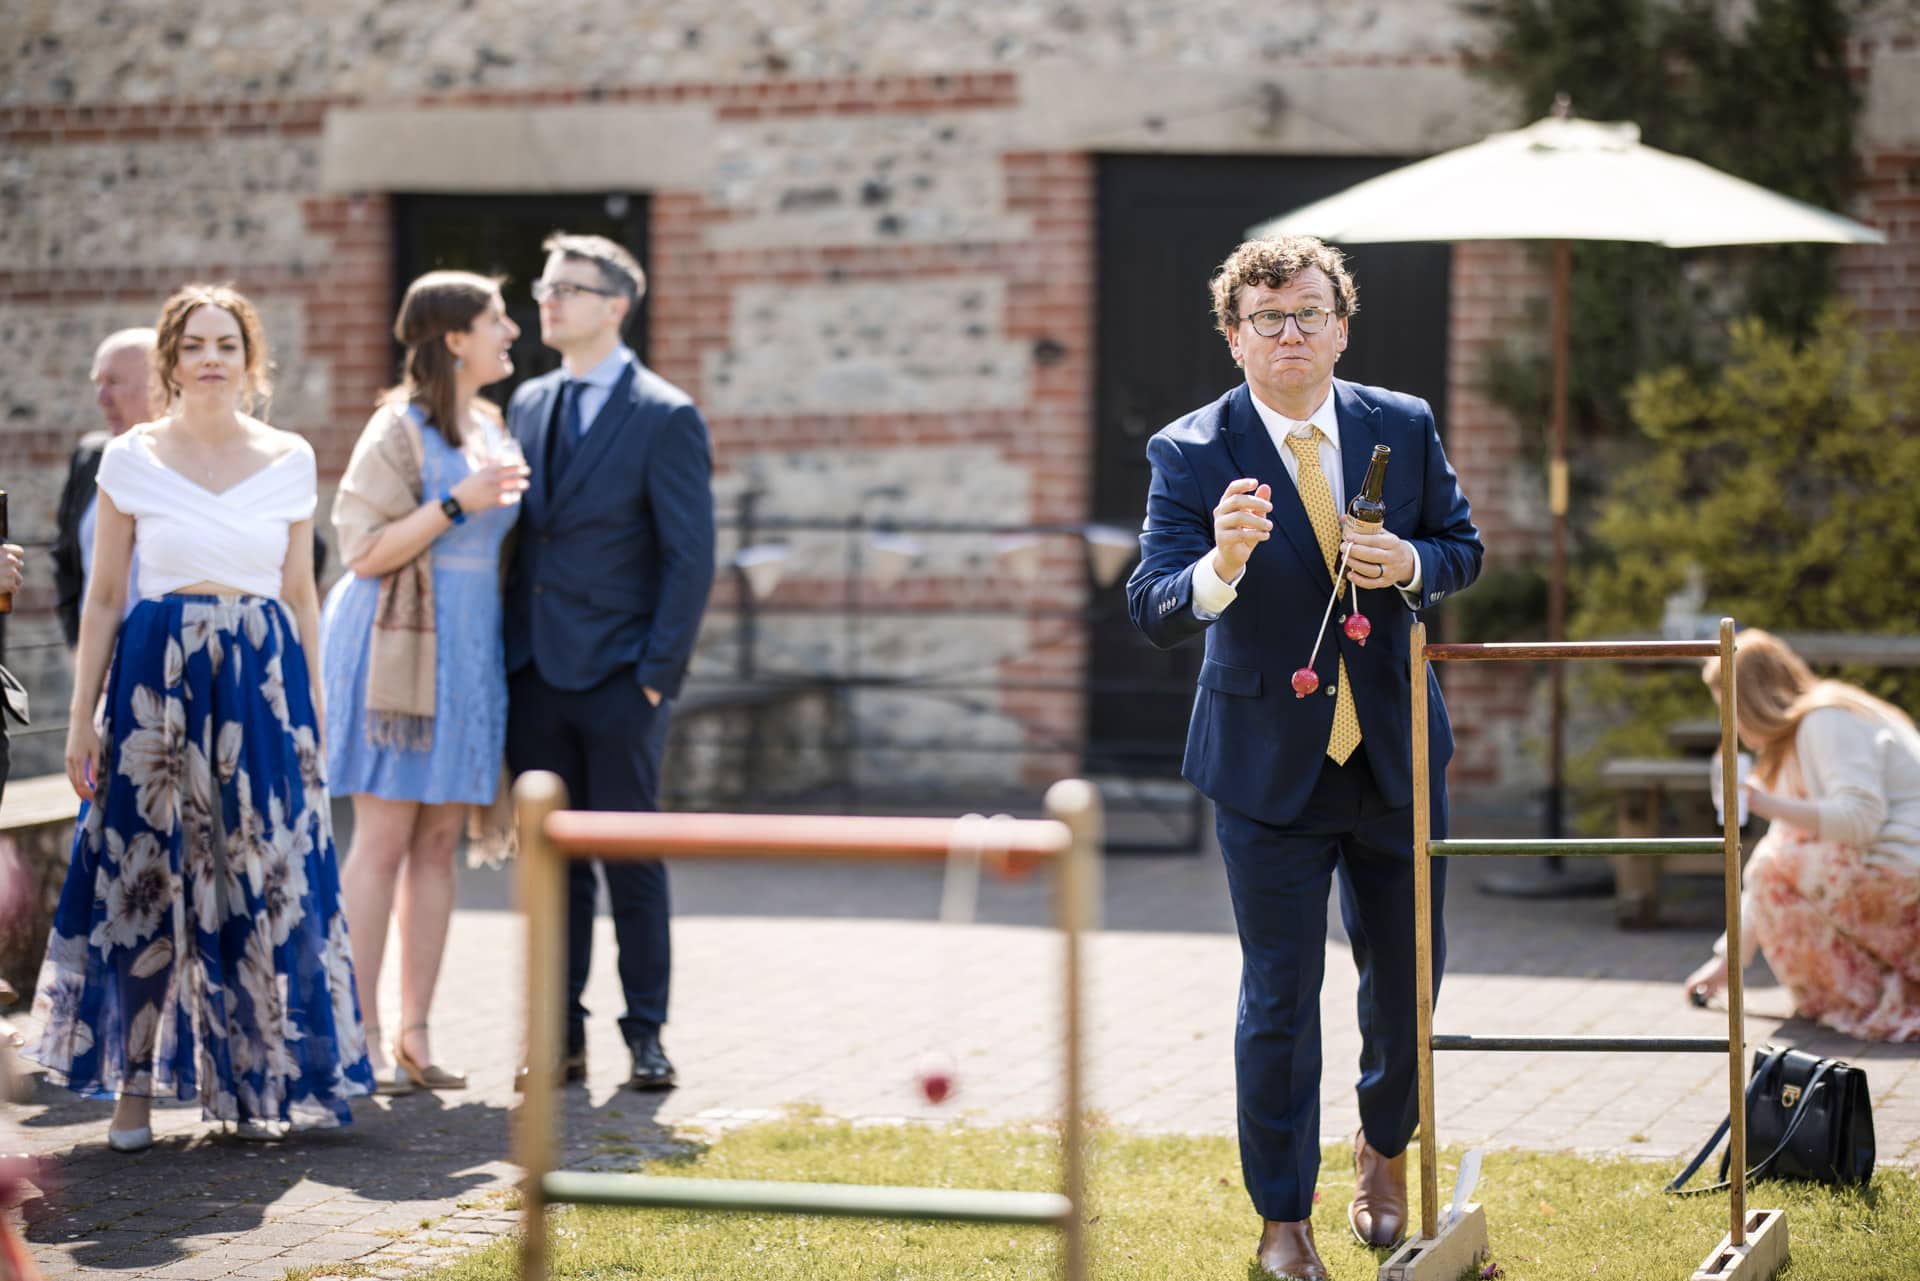 Wedding Games in the Courtyard of The Gathering Barn